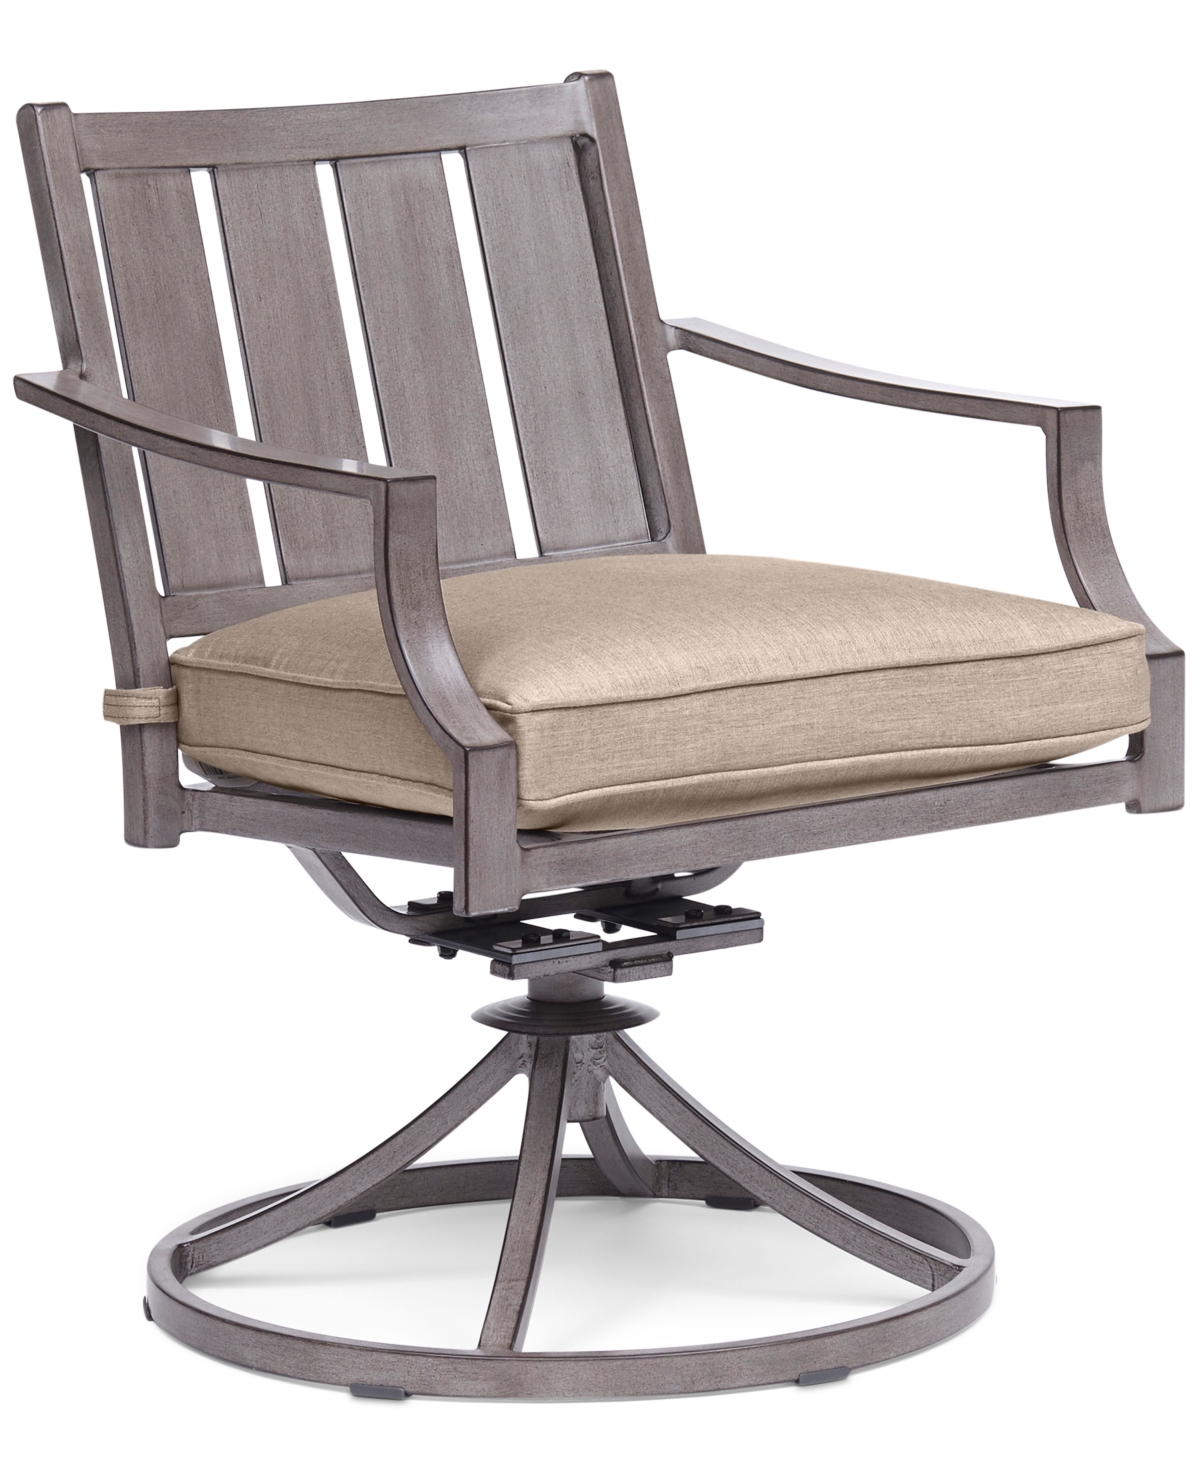 Agio Set Of 2 Wayland Outdoor Swivel Chairs, Created For Macy's In Outdura Remy Pebble